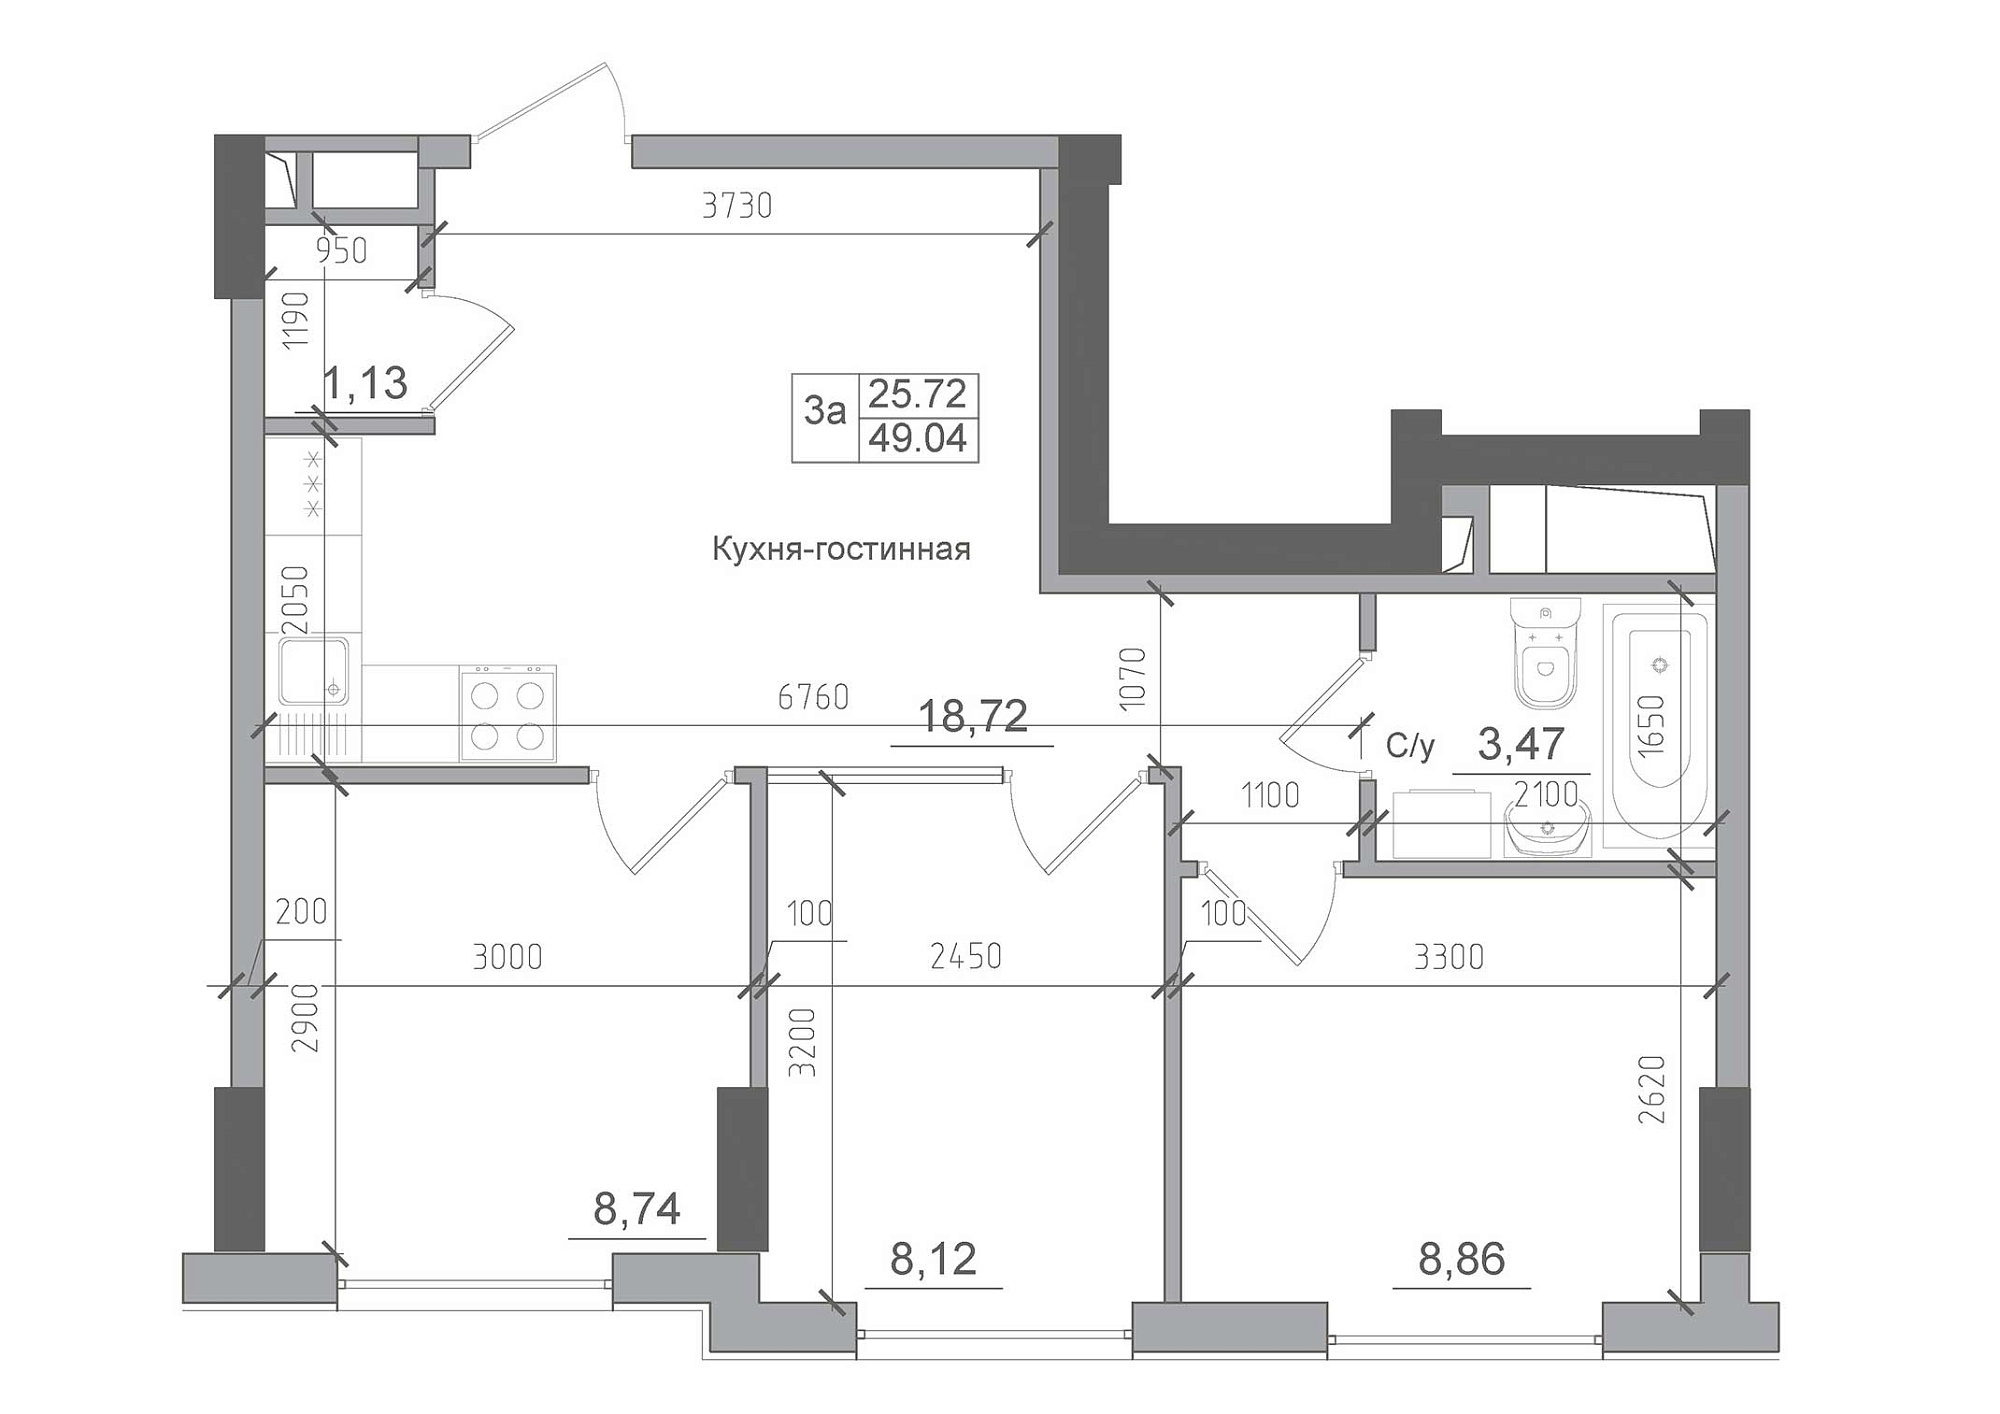 Planning 3-rm flats area 49.04m2, AB-22-02/00007.